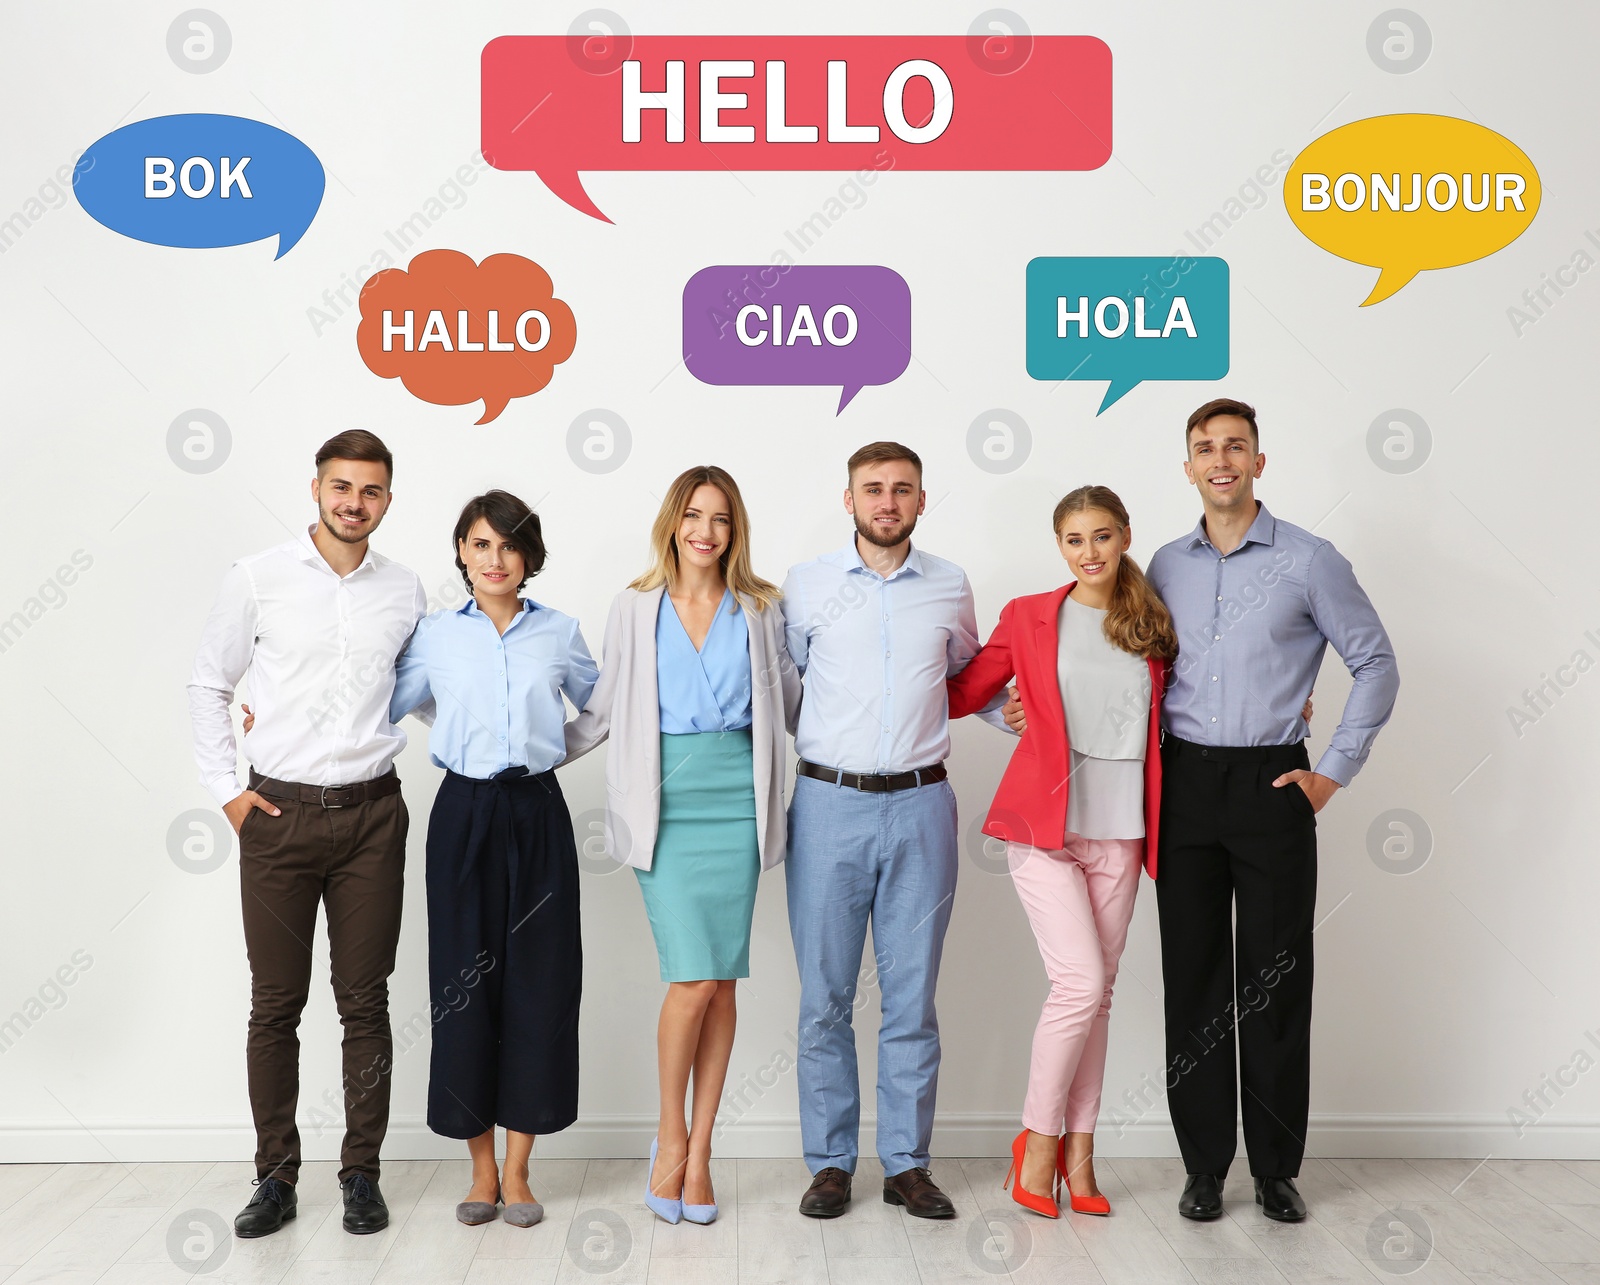 Image of Happy people posing near light wall and illustration of speech bubbles with word Hello written in different languages